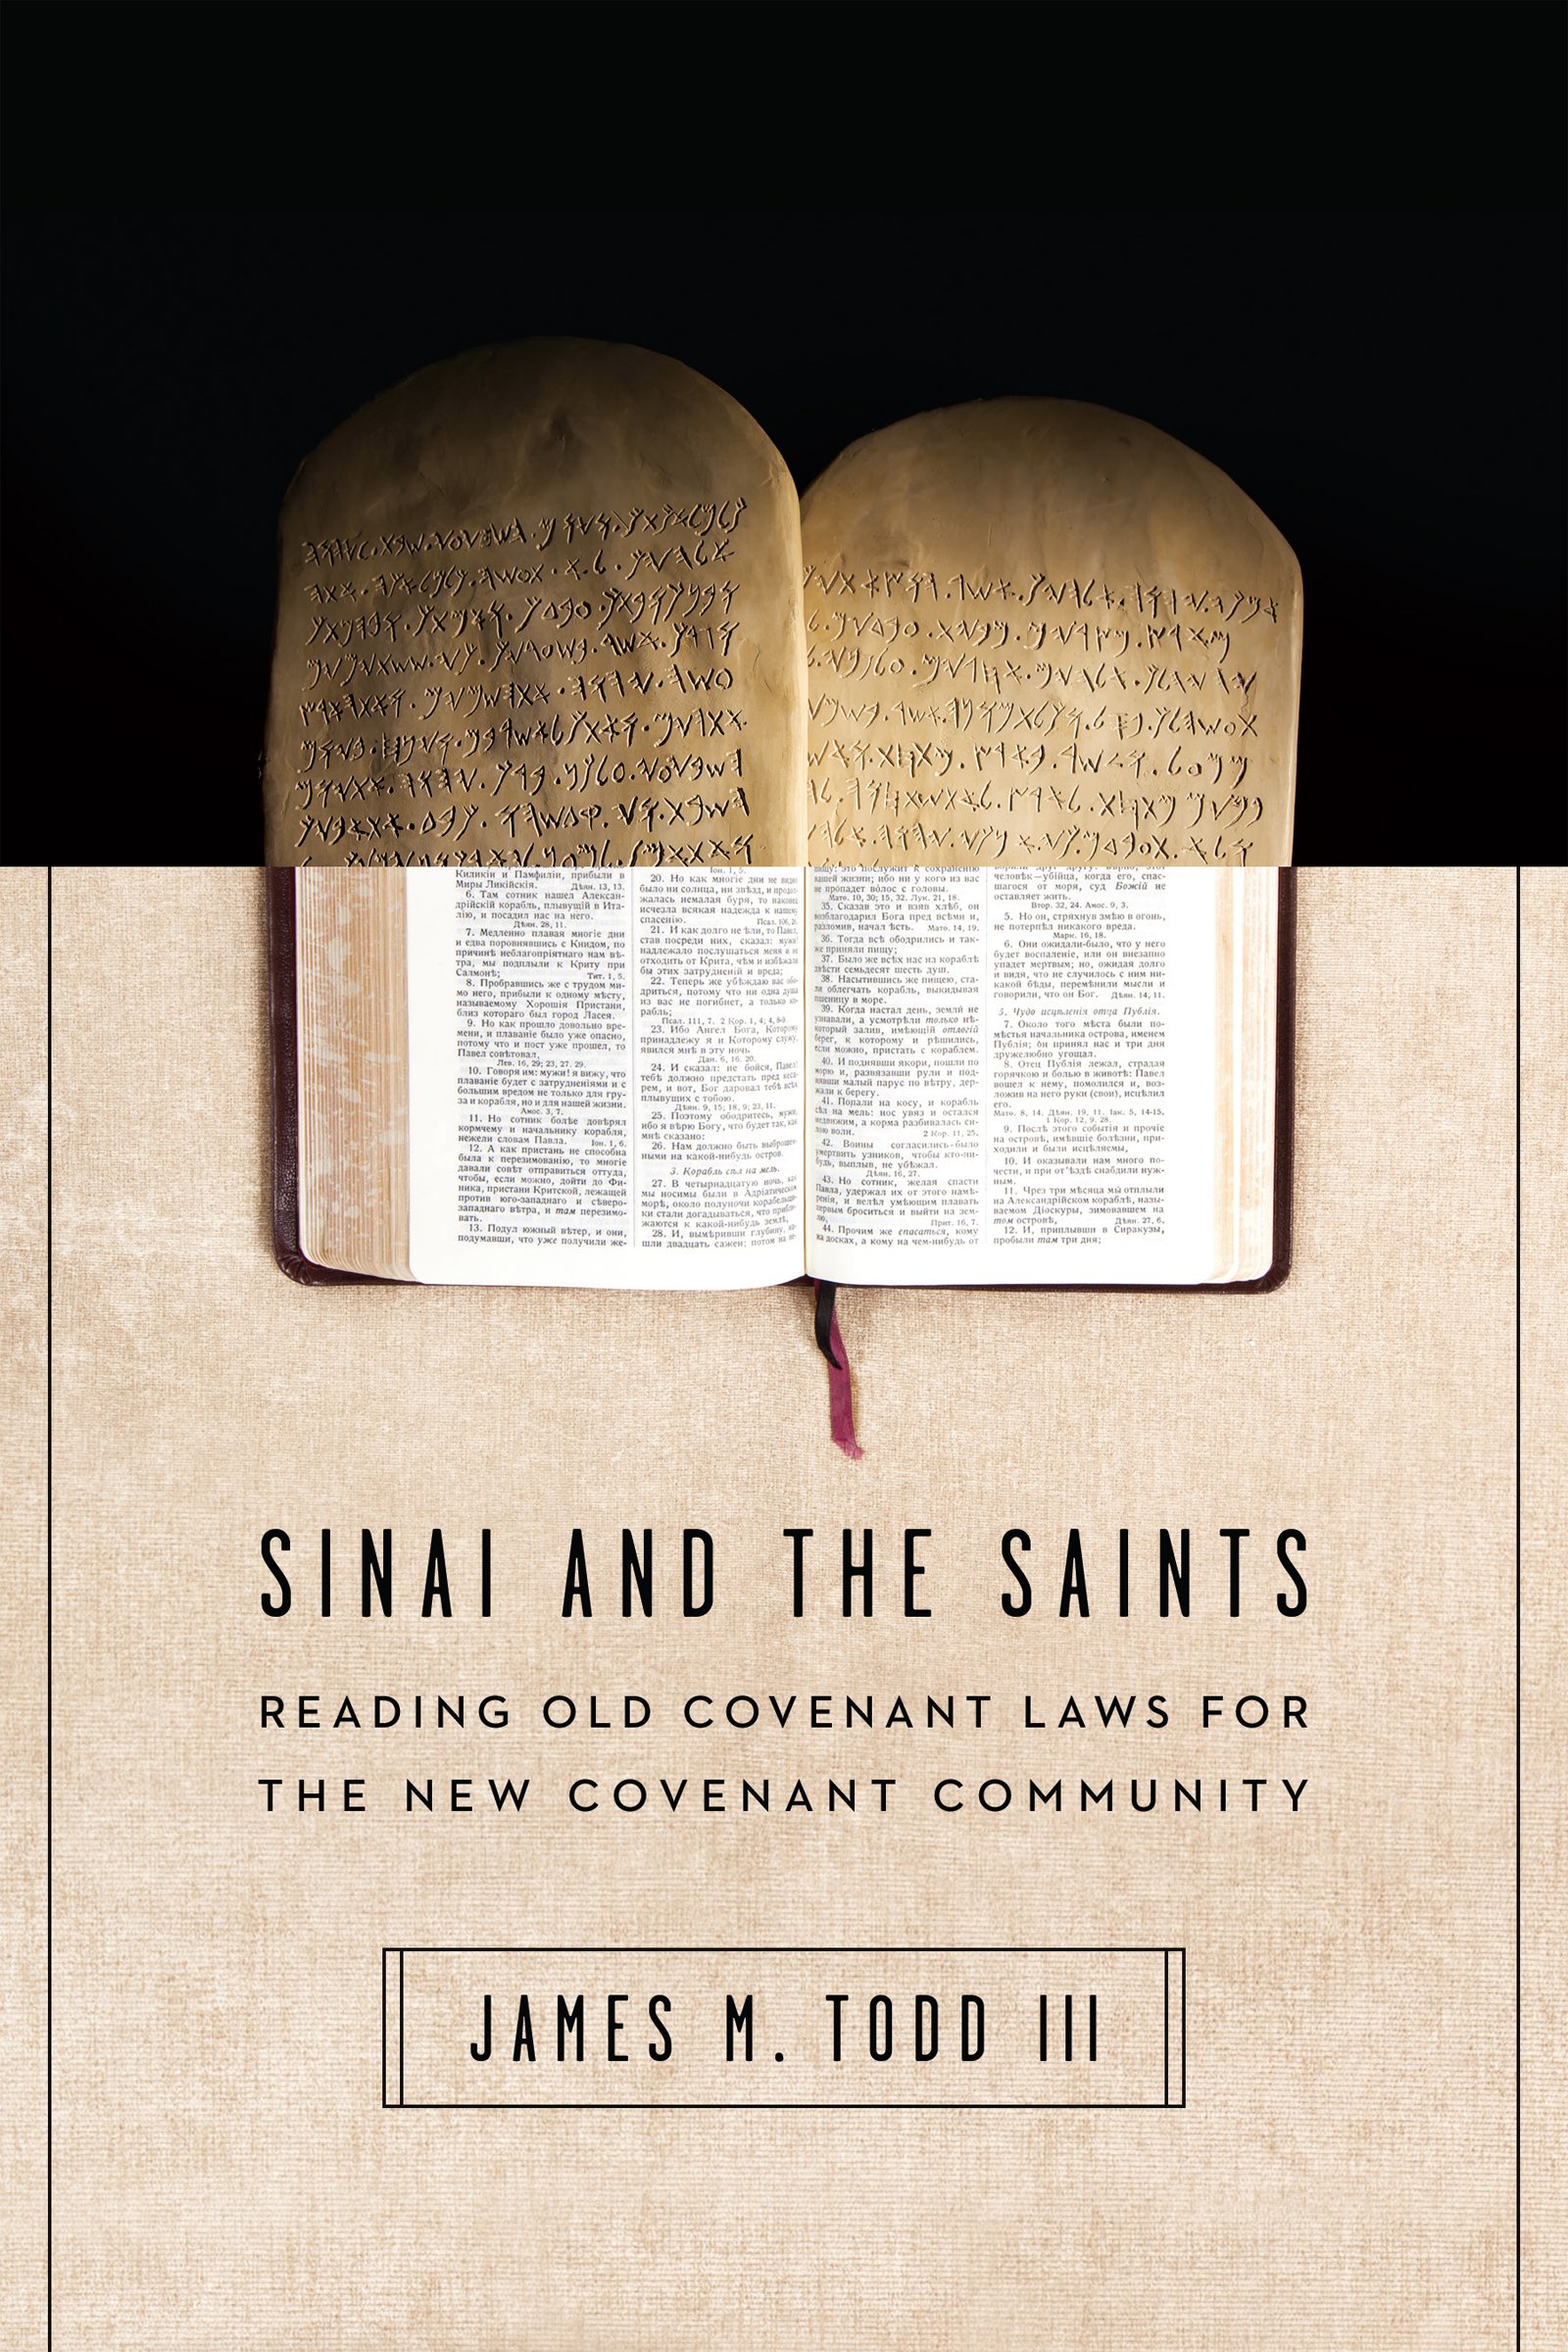 Book Notice: SINAI AND THE SAINTS: READING OLD COVENANT LAWS FOR THE NEW COVENANT COMMUNITY, by  James M. Todd III